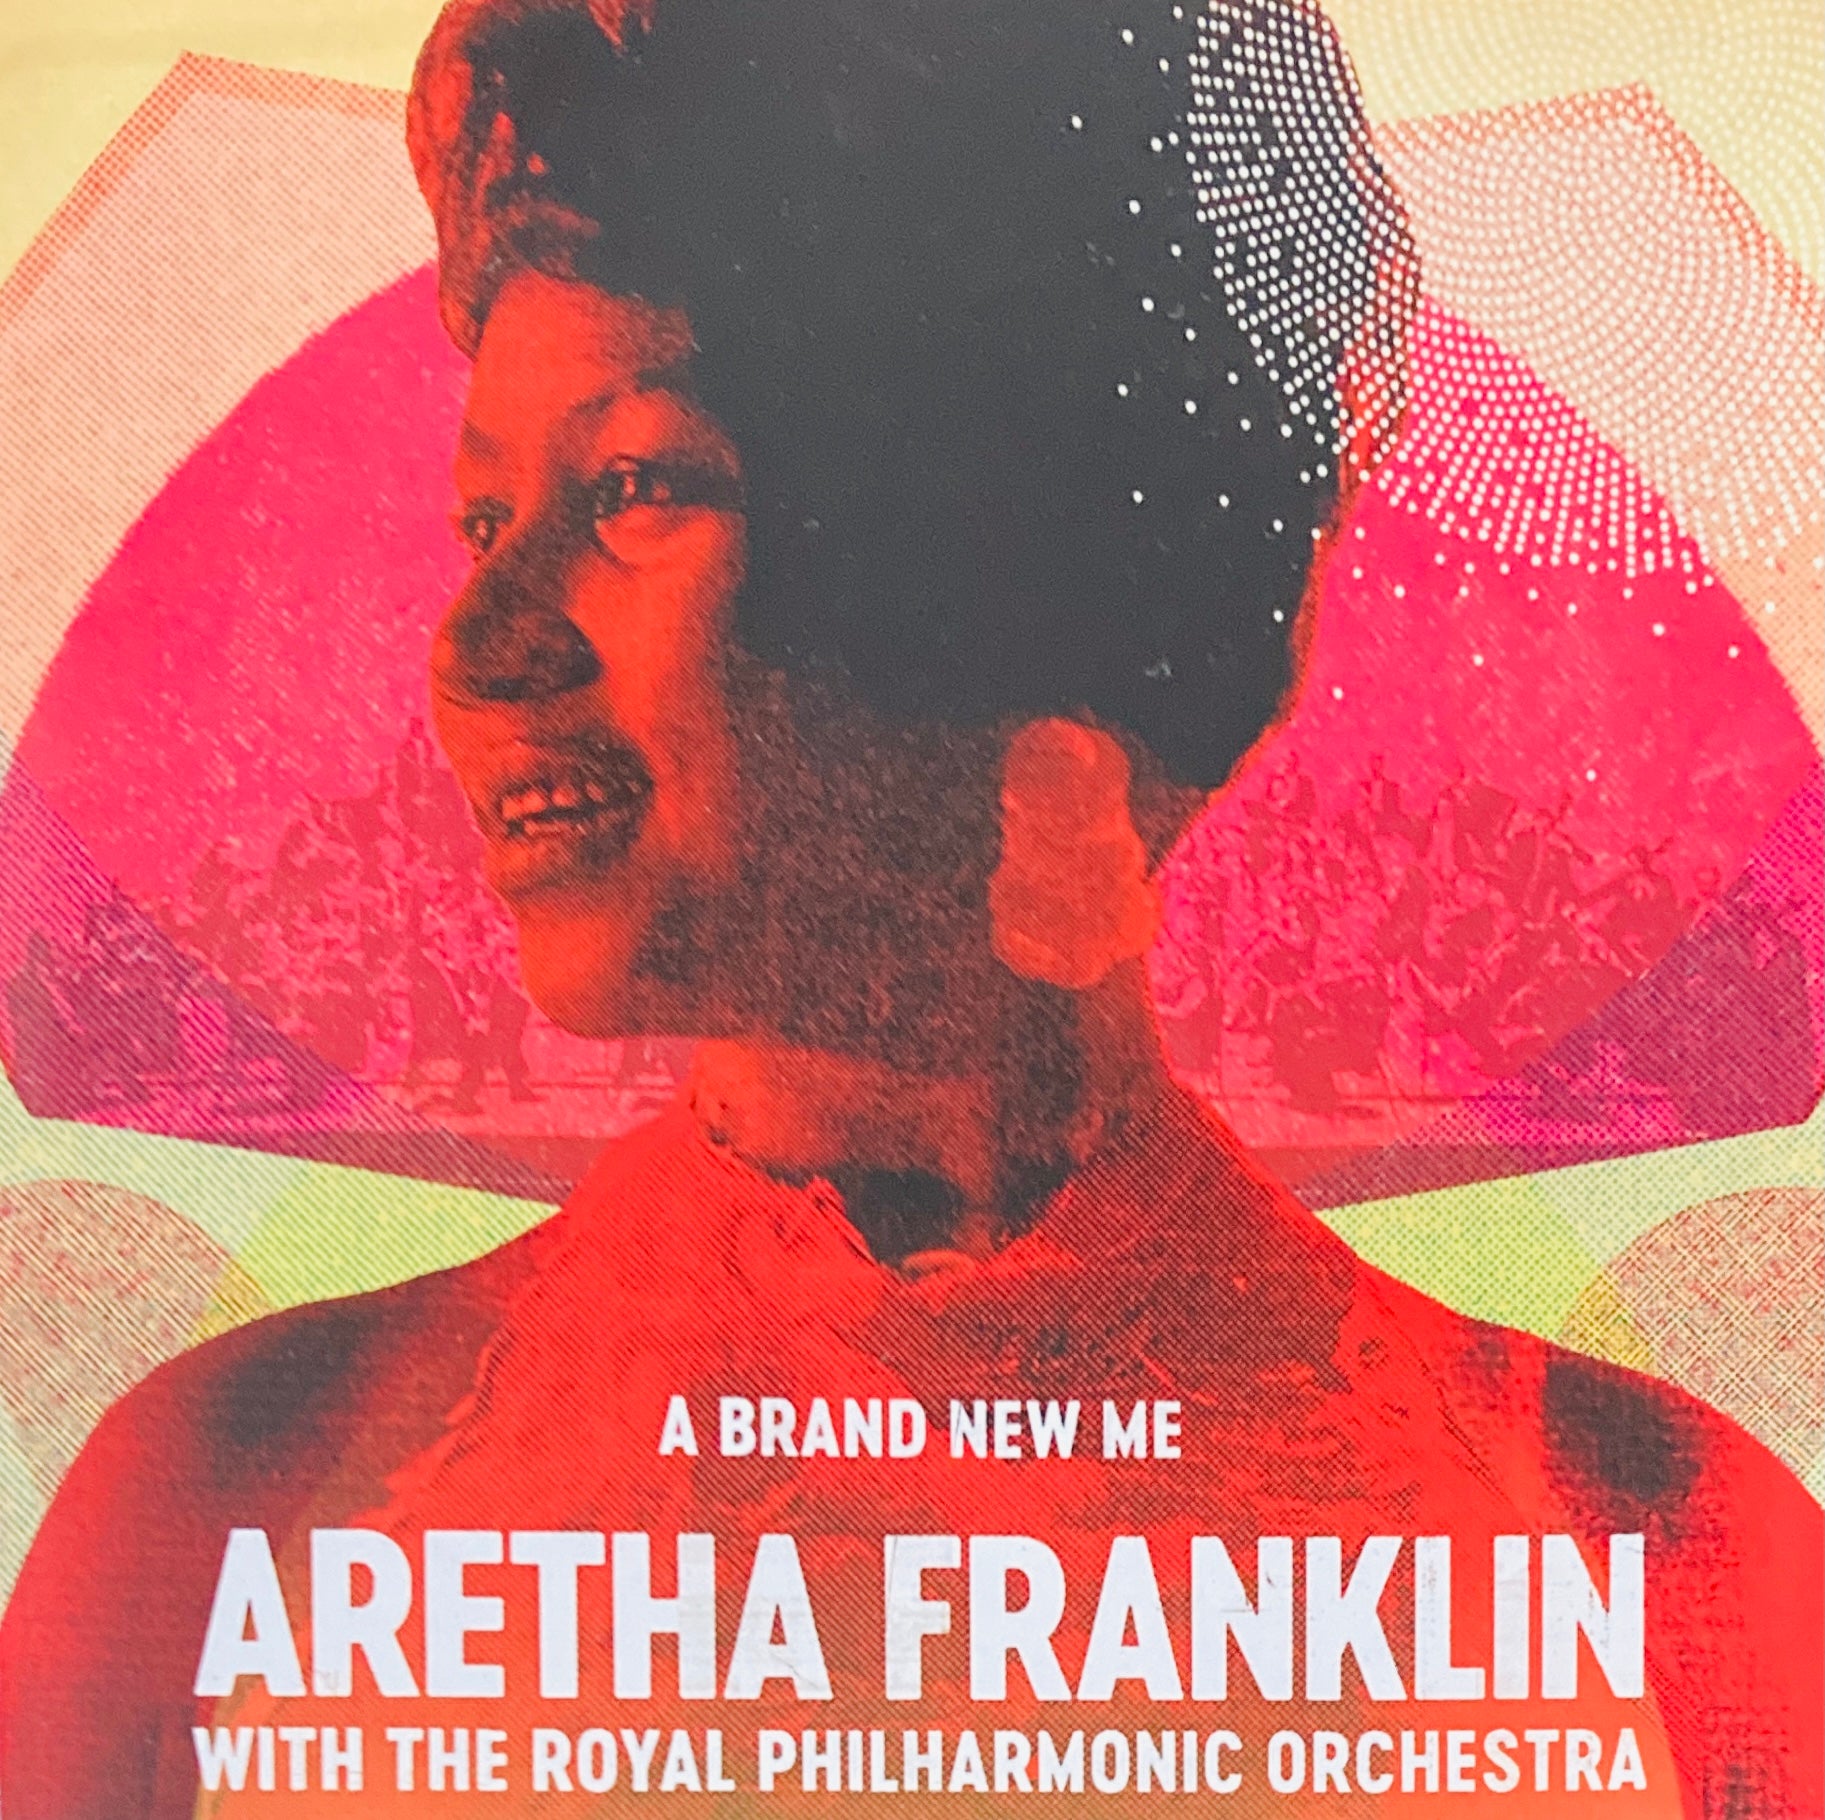 Aretha Franklin with The Royal Philharmonic Orchestra "A Brand New Me" CD (2017)